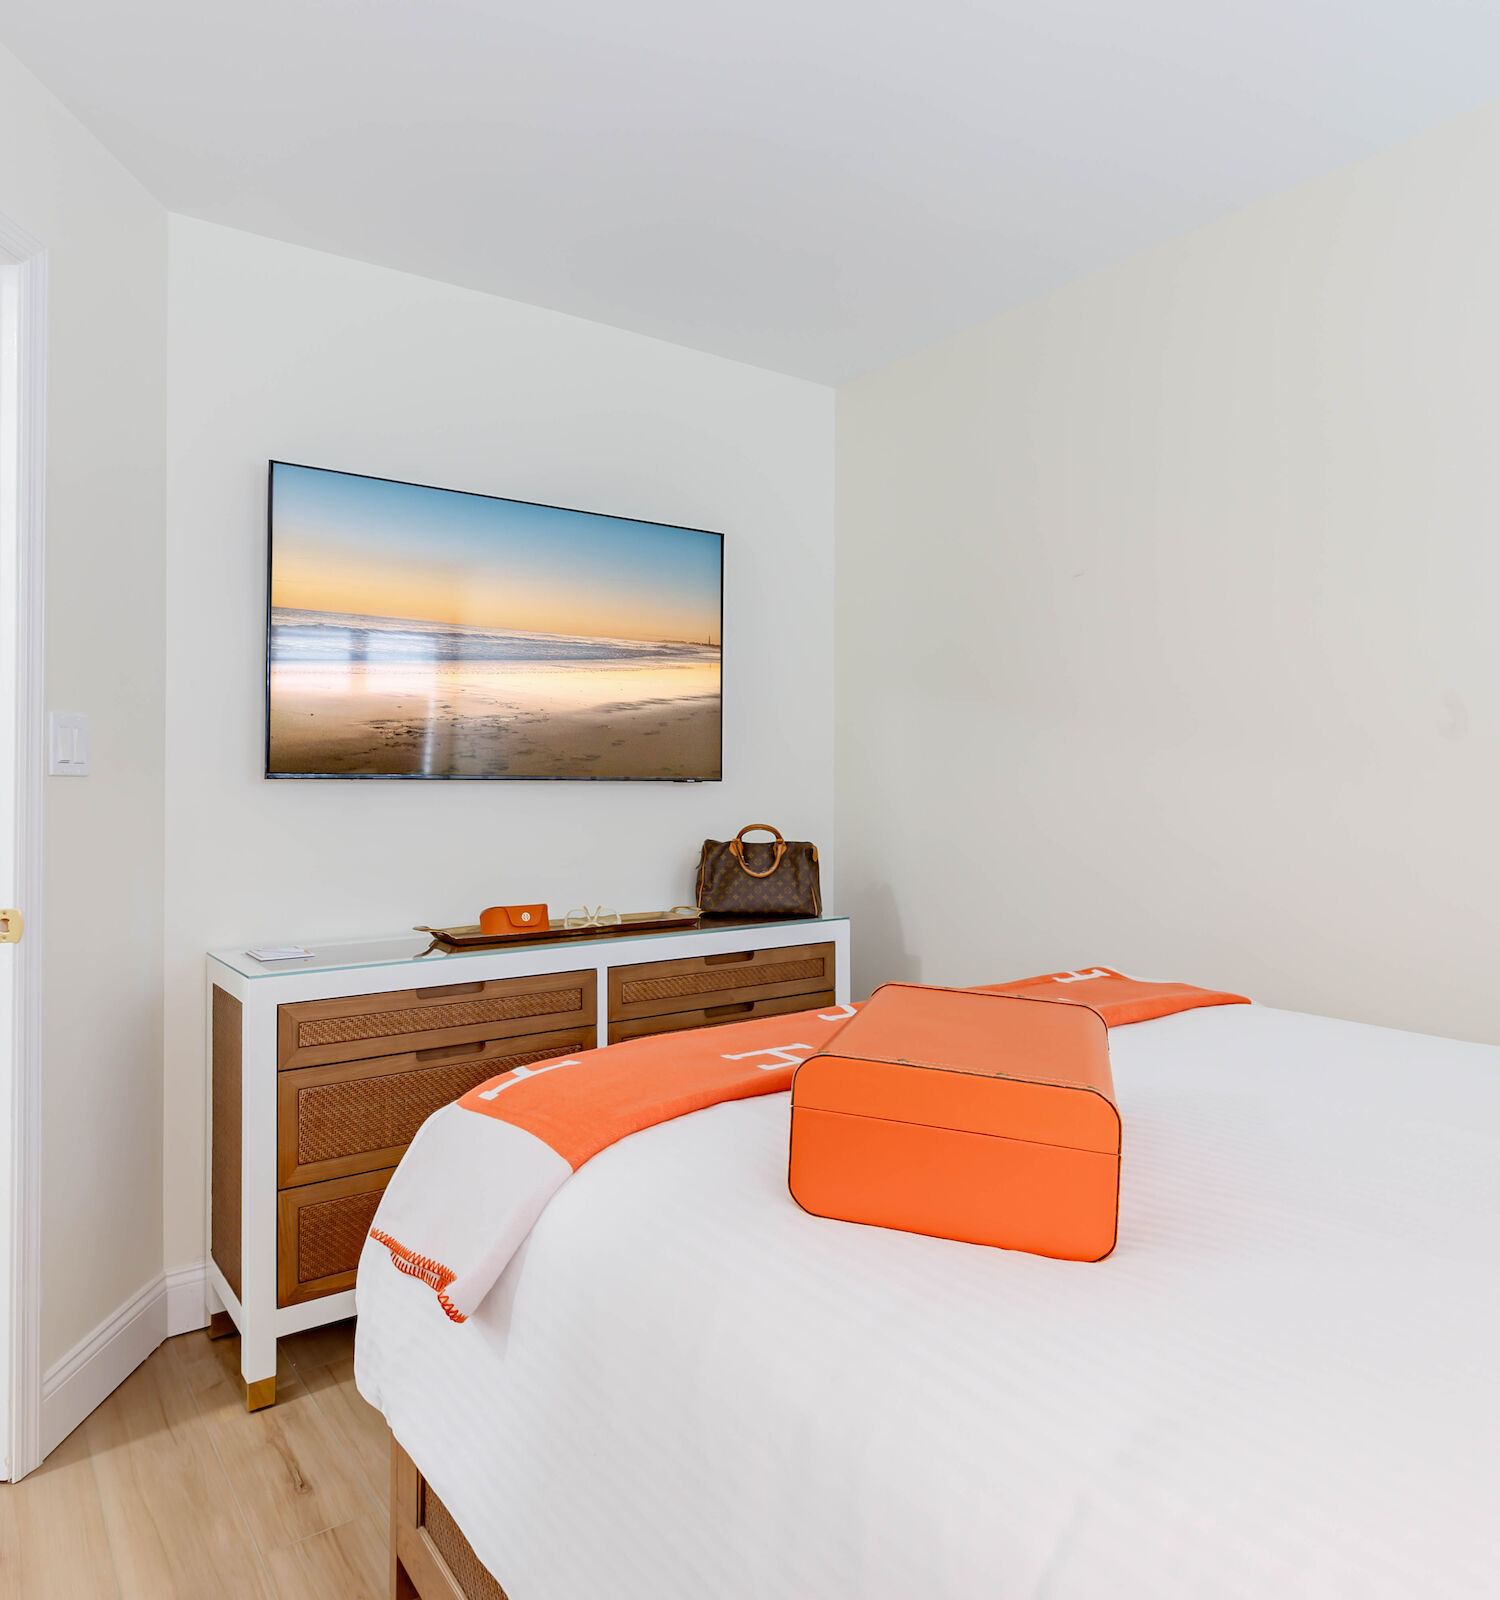 A modern bedroom with a neatly made bed, accented with orange pillows and blankets. There’s a sideboard, a mounted TV, and a hallway with décor.